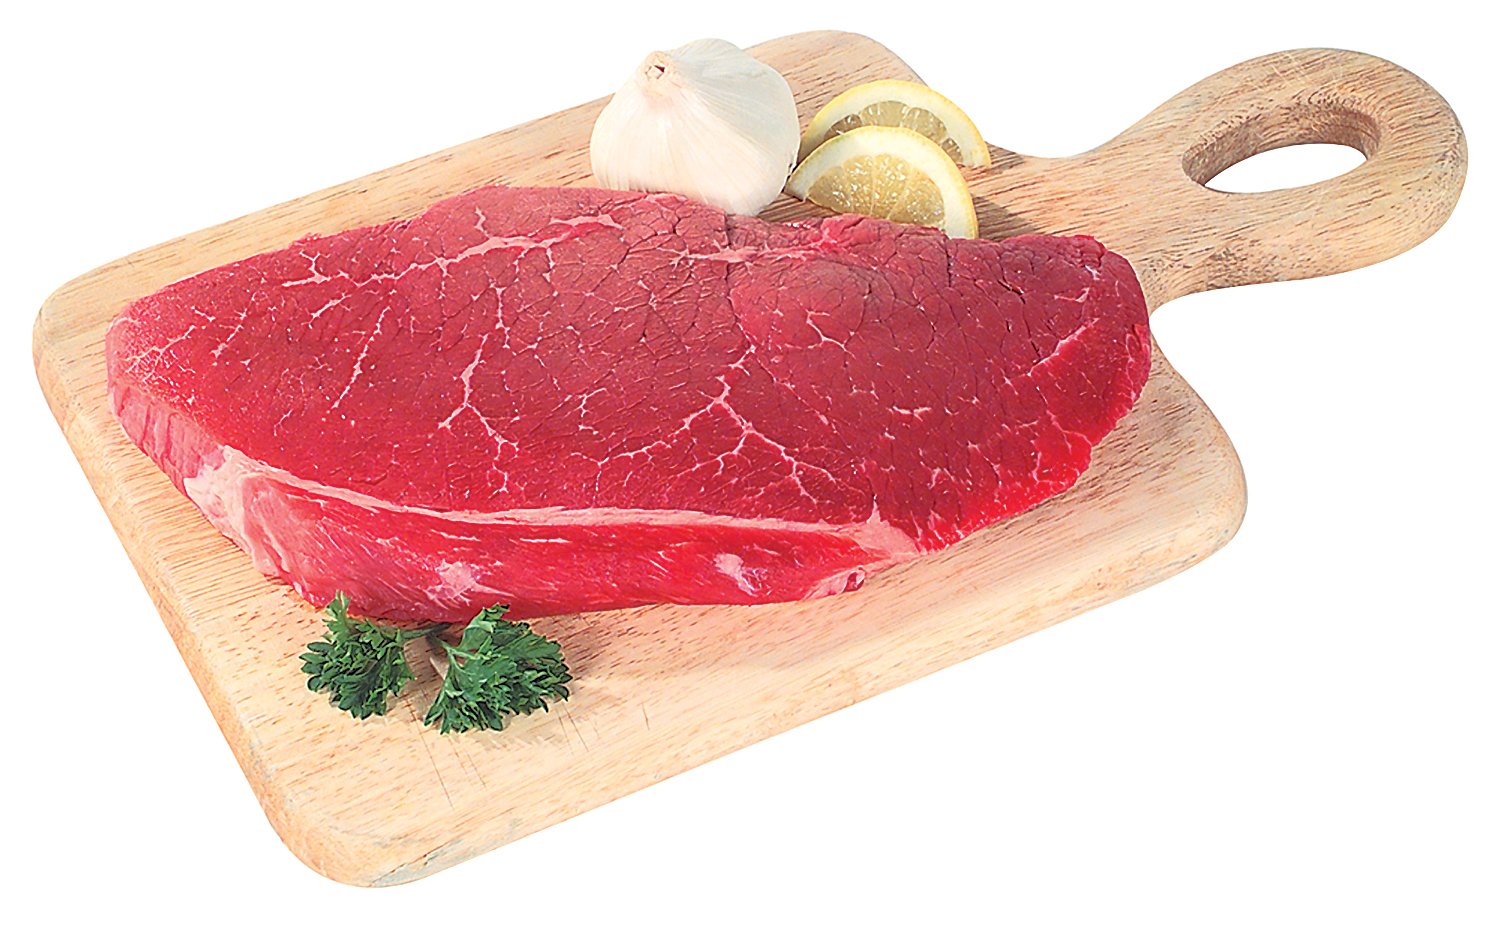 Raw Beef London Broil on a Wooden Board Food Picture